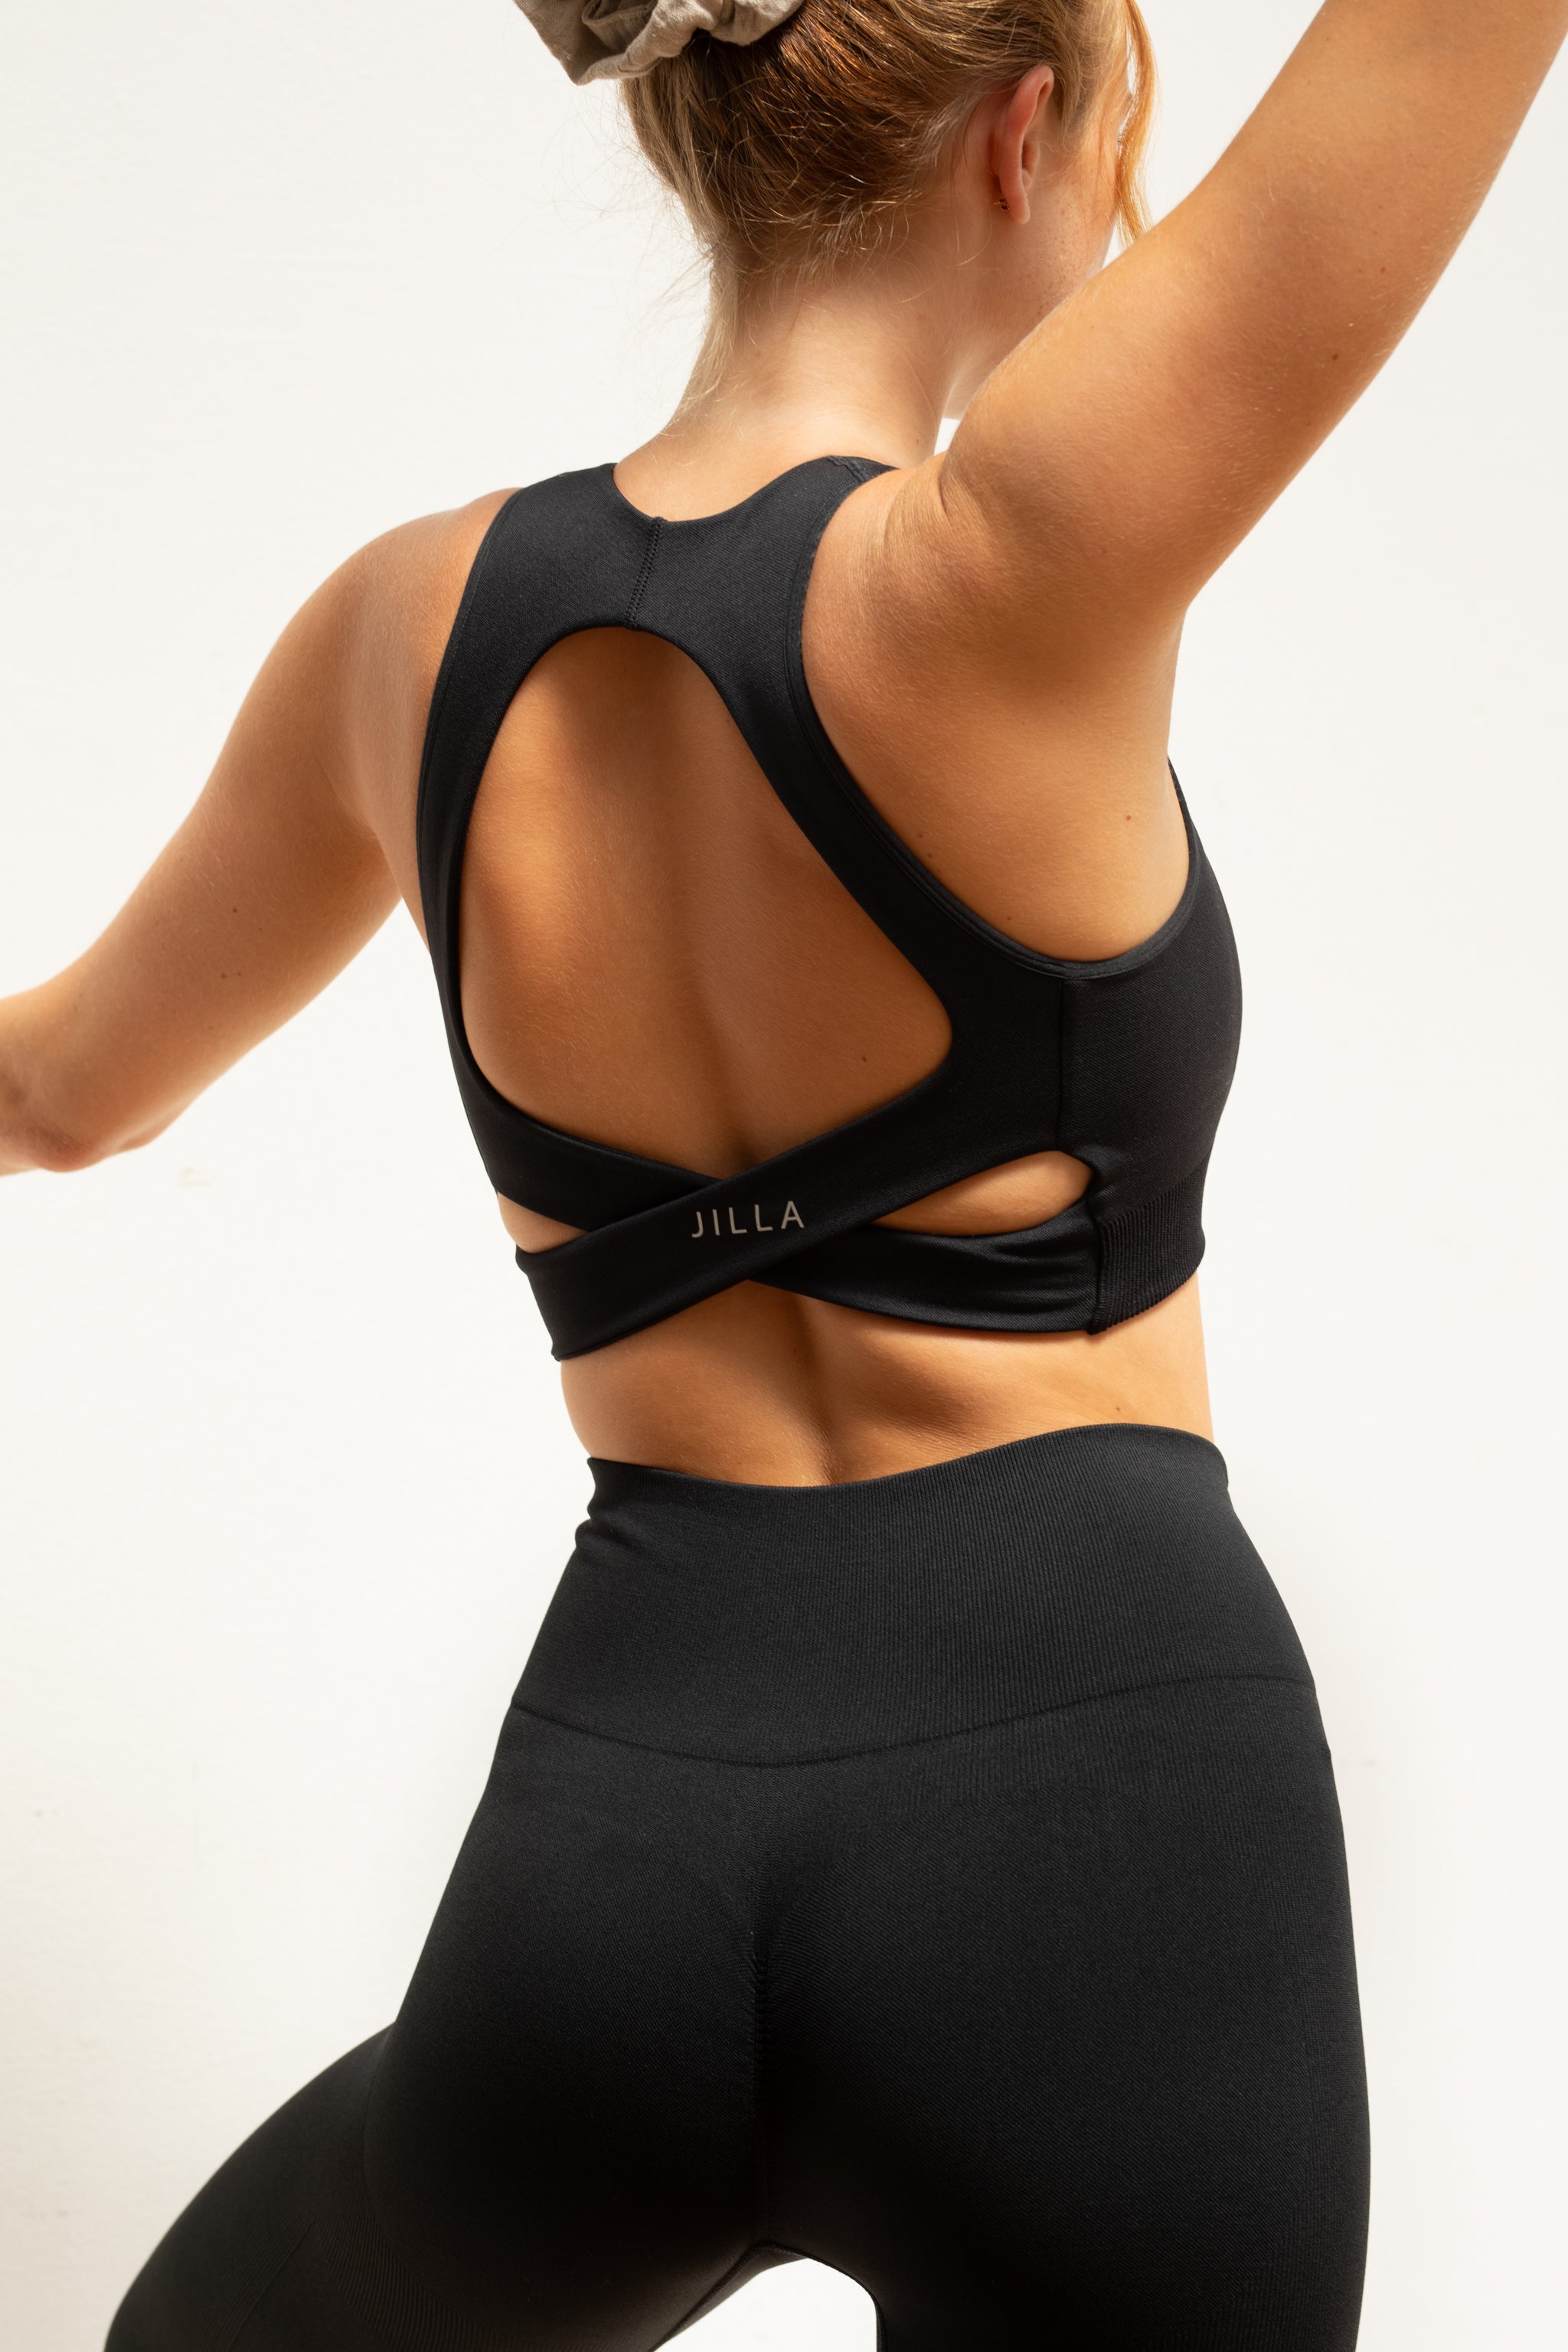 Black recycled supportive sports bra and black leggings from sustainable women's activewear brand, Jilla.